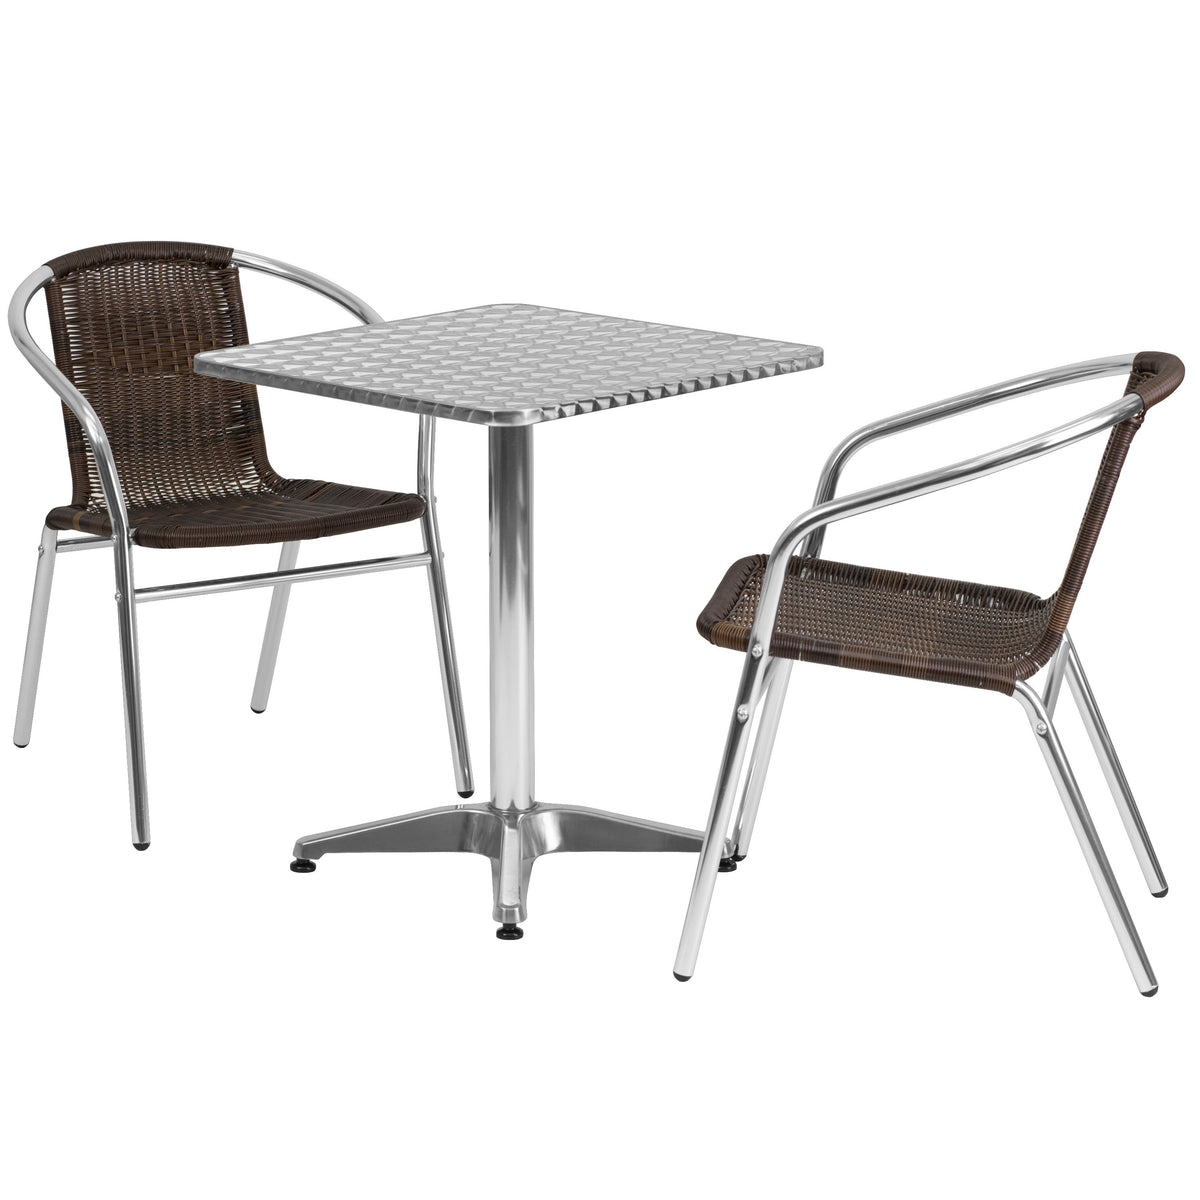 Dark Brown |#| 23.5inch Square Aluminum Indoor-Outdoor Table Set with 2 Dark Brown Rattan Chairs